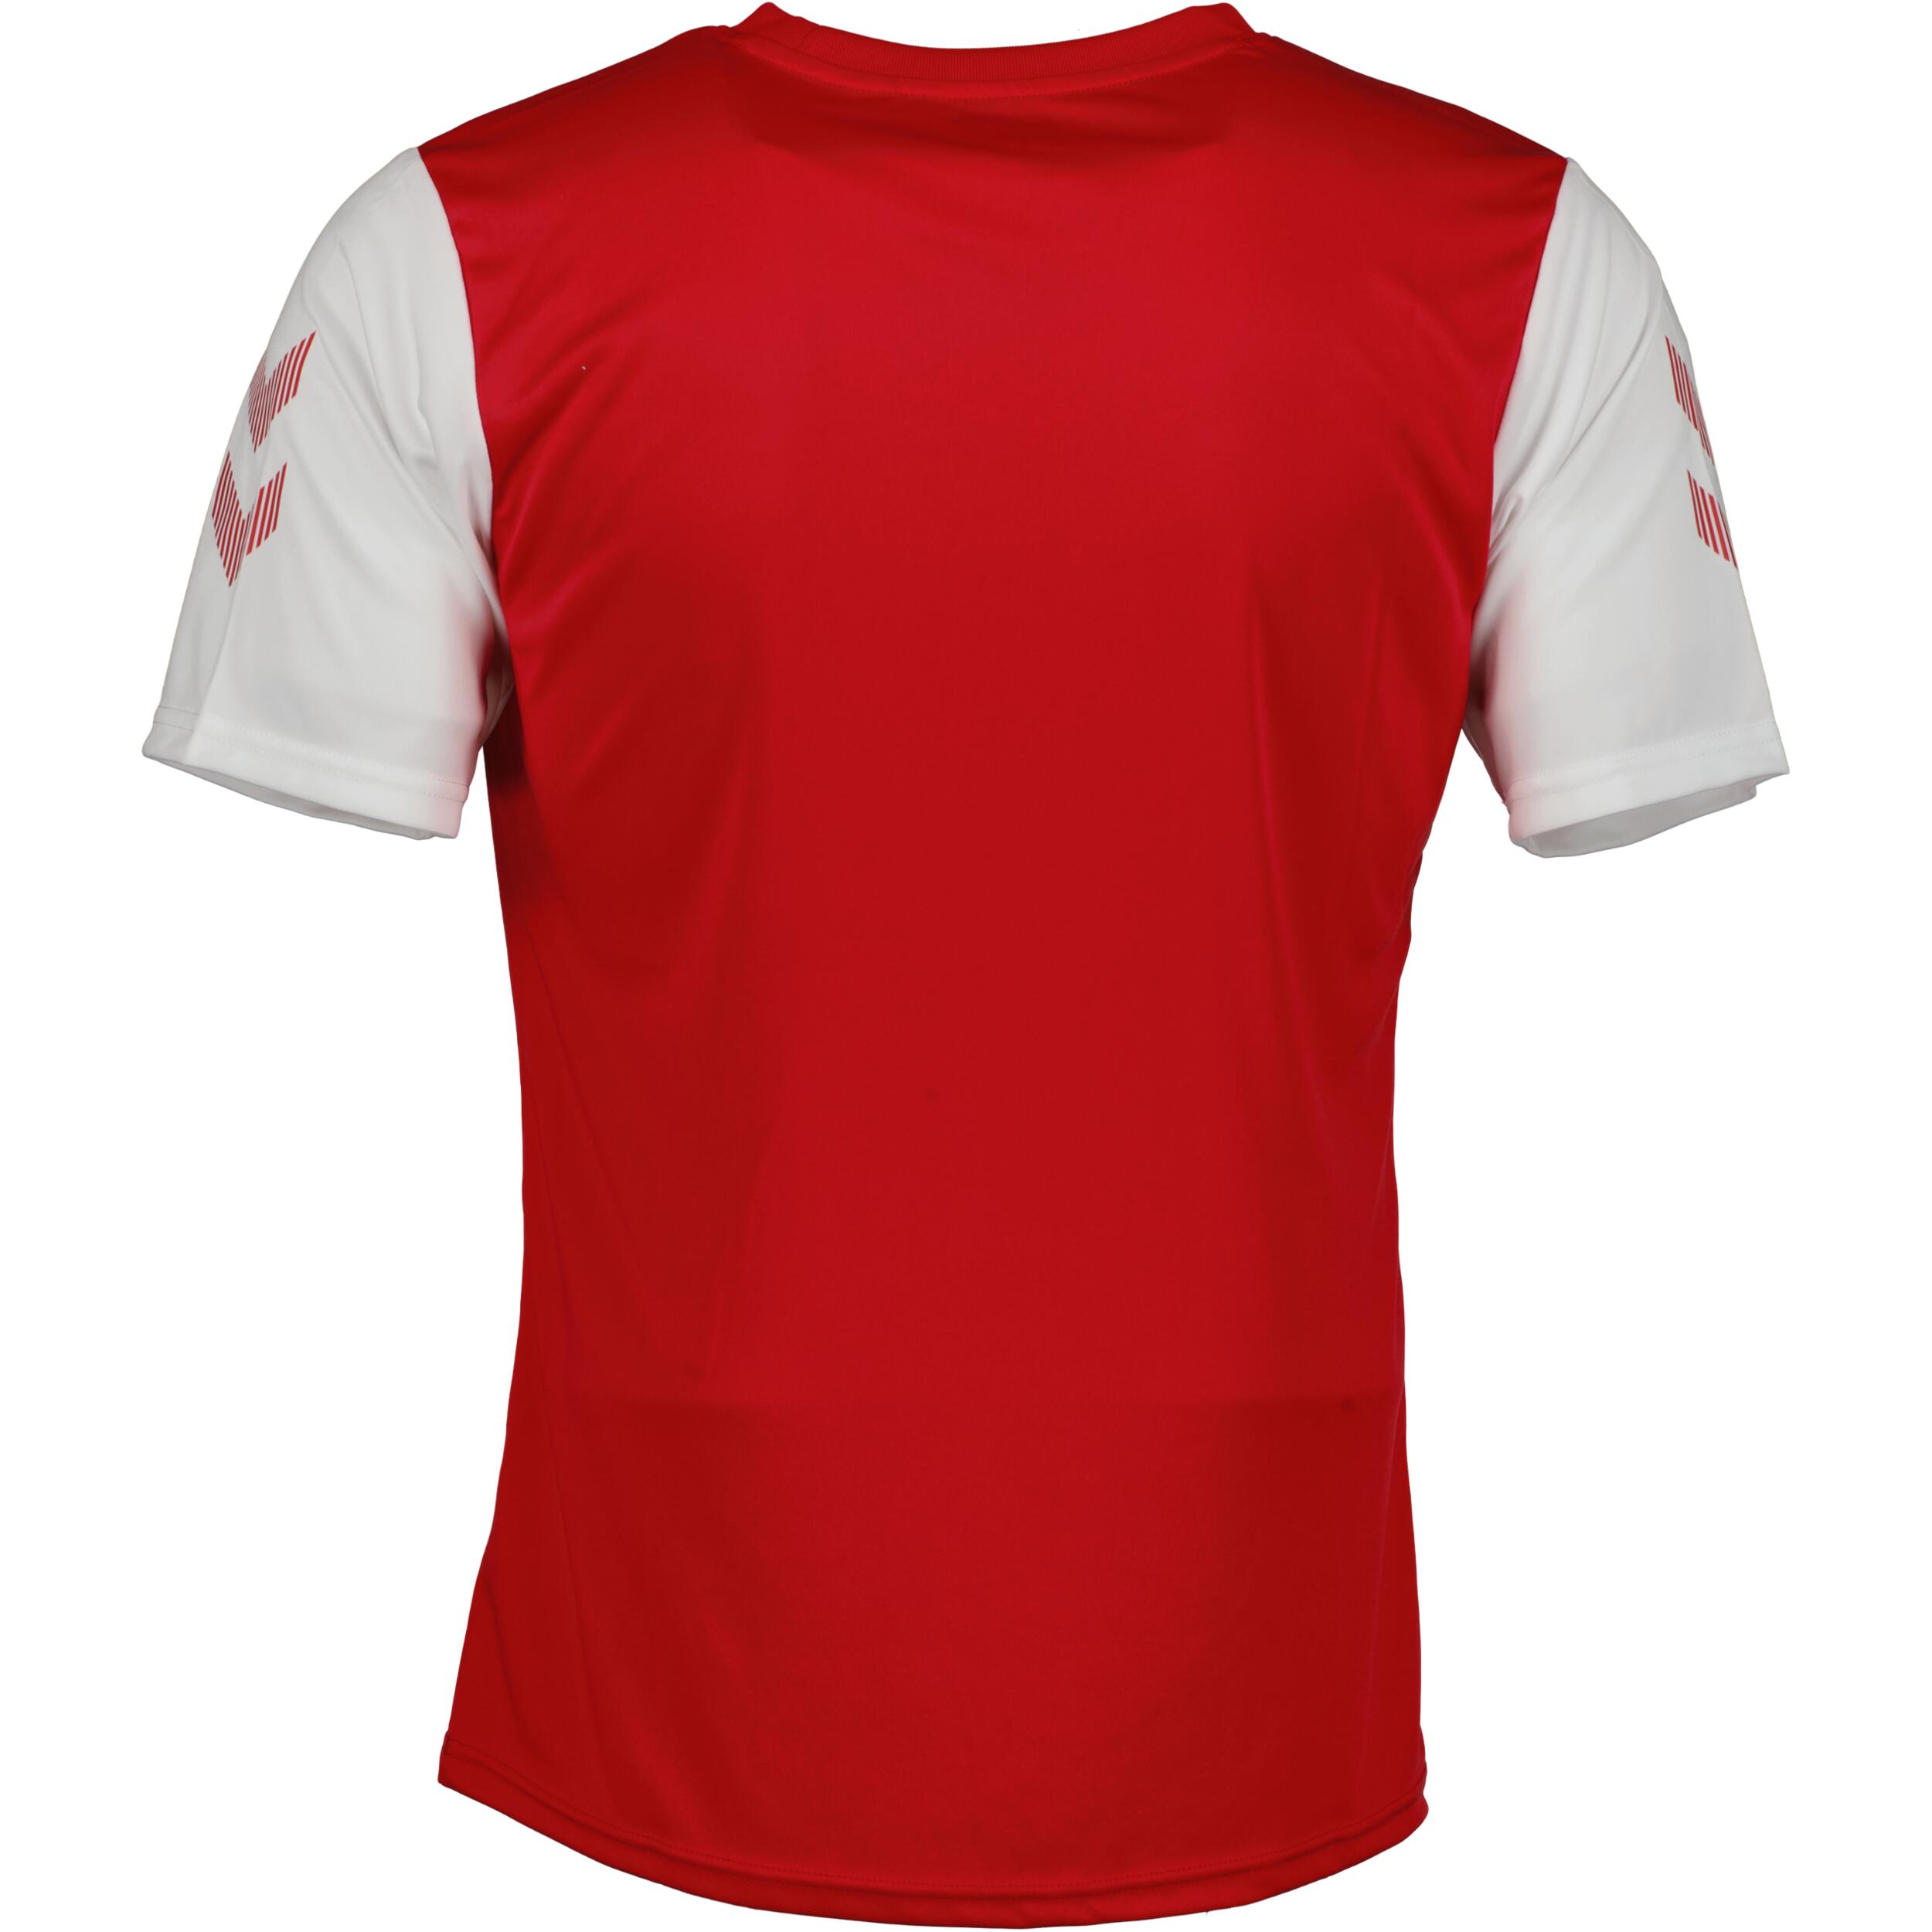 Match jersey for men, great for football, in red/white 2/3